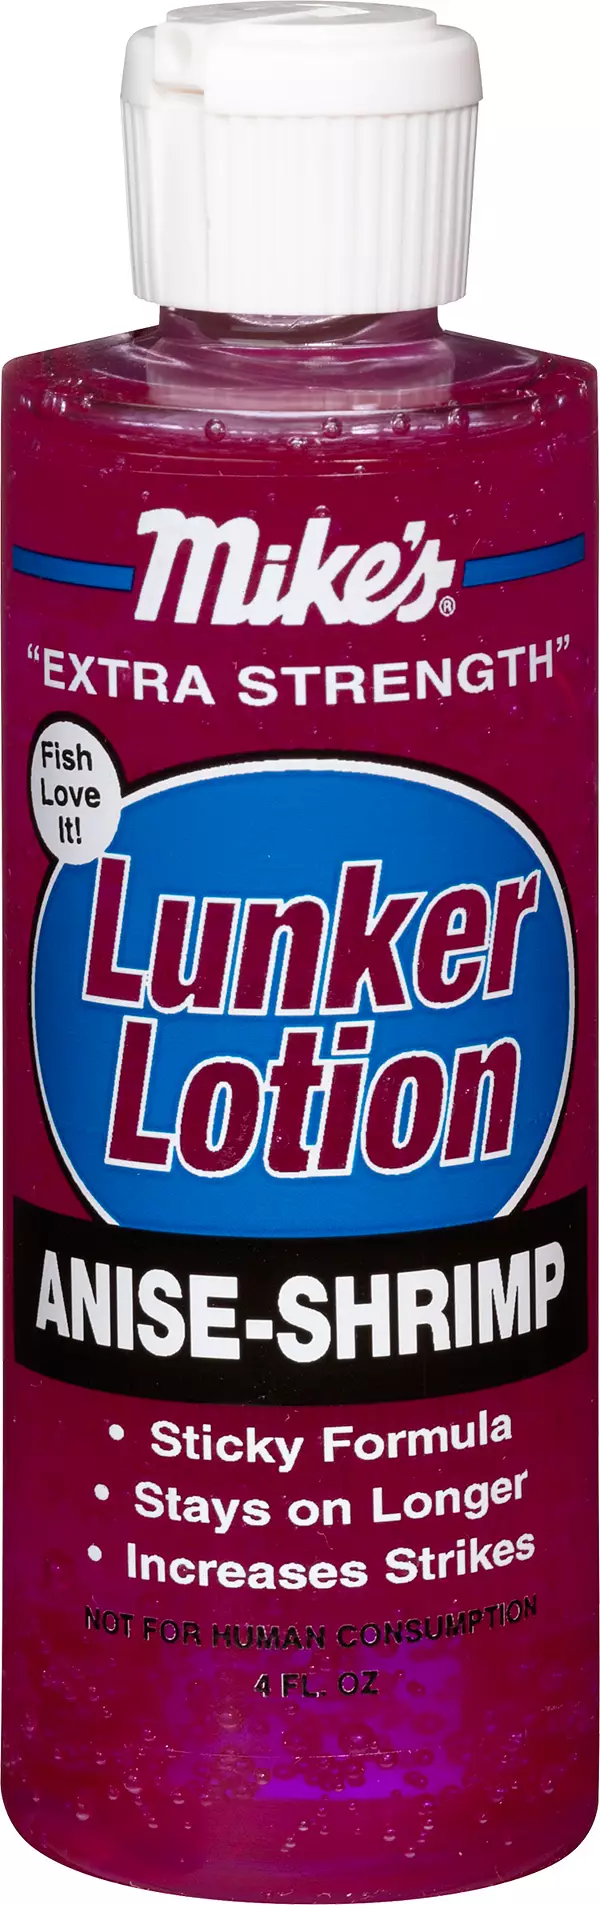 Mike's Lunker Lotion  Dick's Sporting Goods